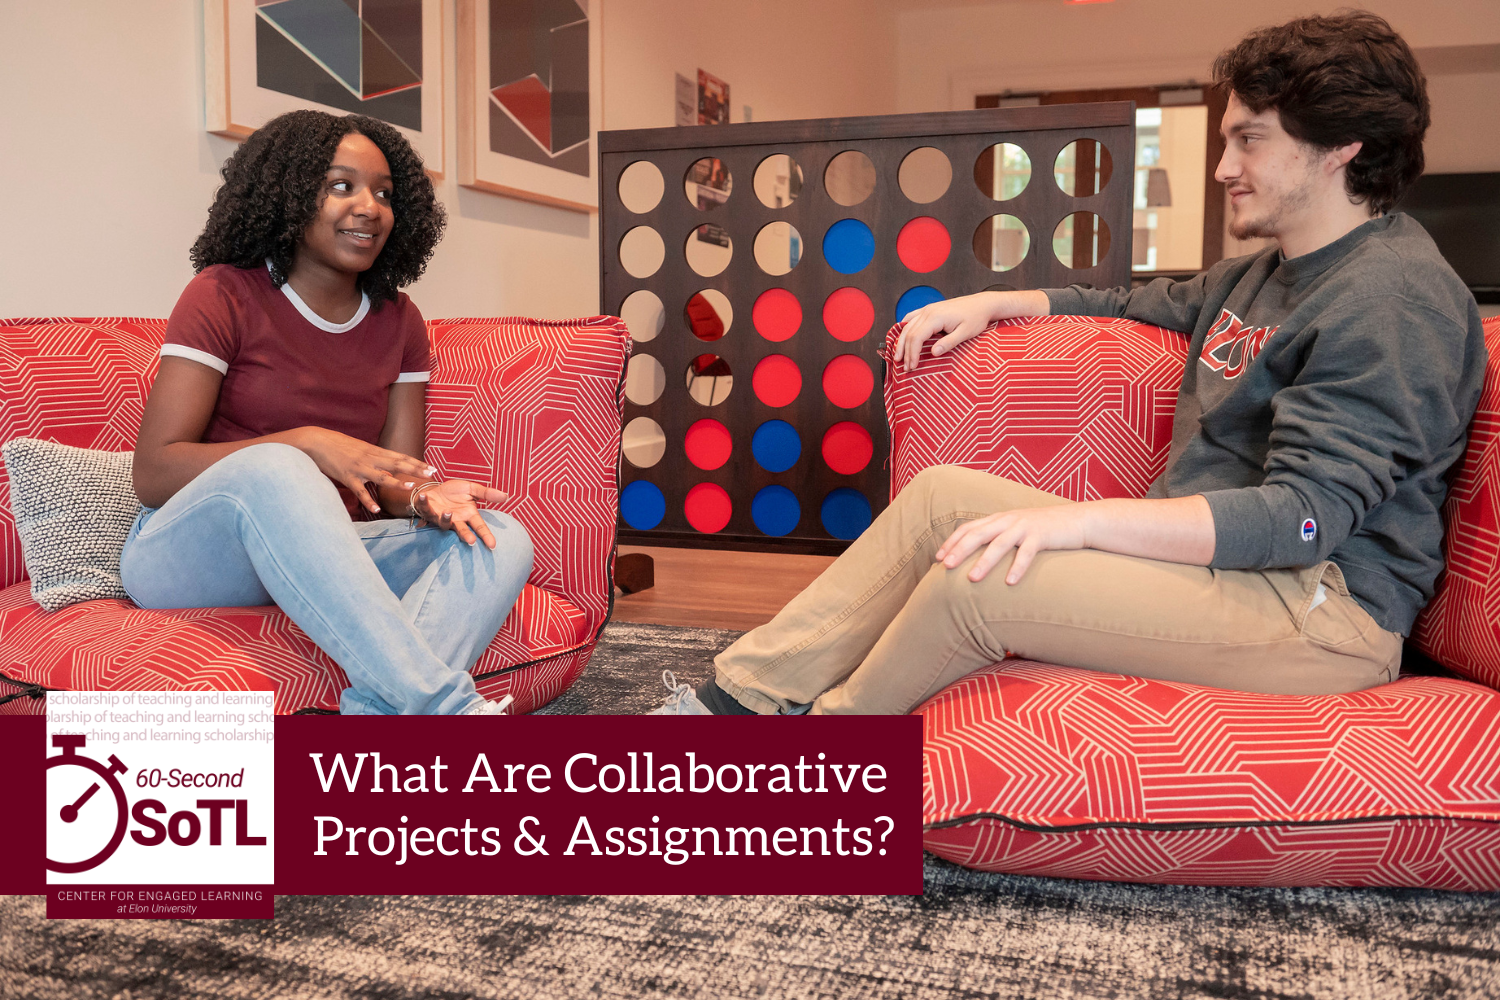 Two people sit facing each other on two low, cushioned chairs in a lounge area of a university residence hall. An overlay reads, "60-Second SoTL: What Are Collaborative Projects & Assignments?"